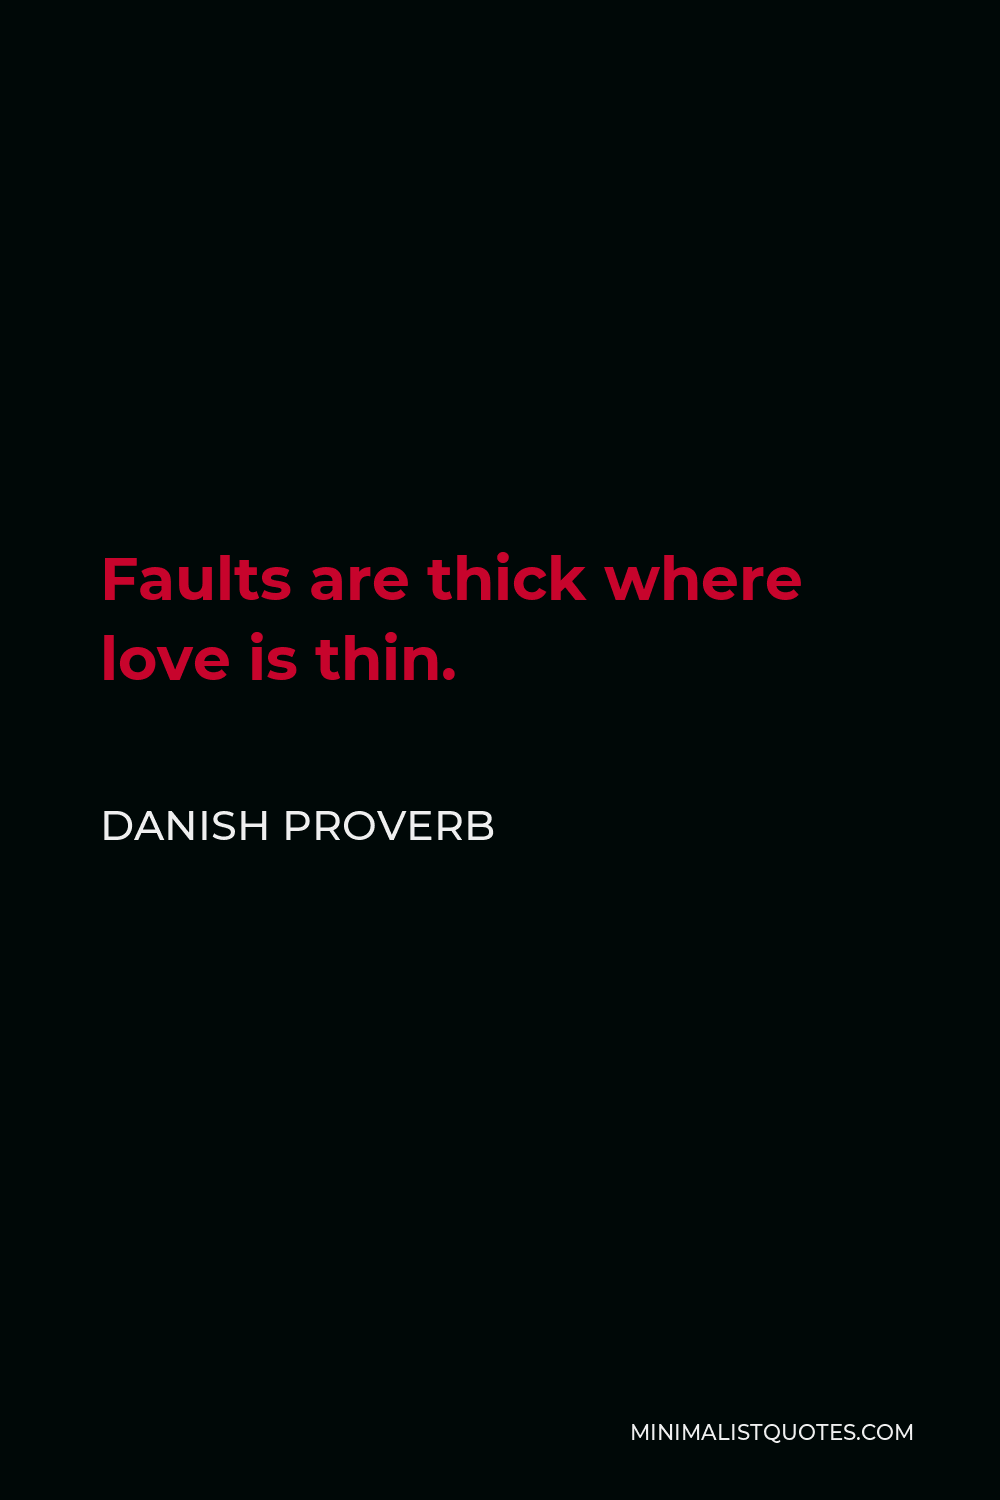 Danish Proverb Quote - Faults are thick where love is thin.